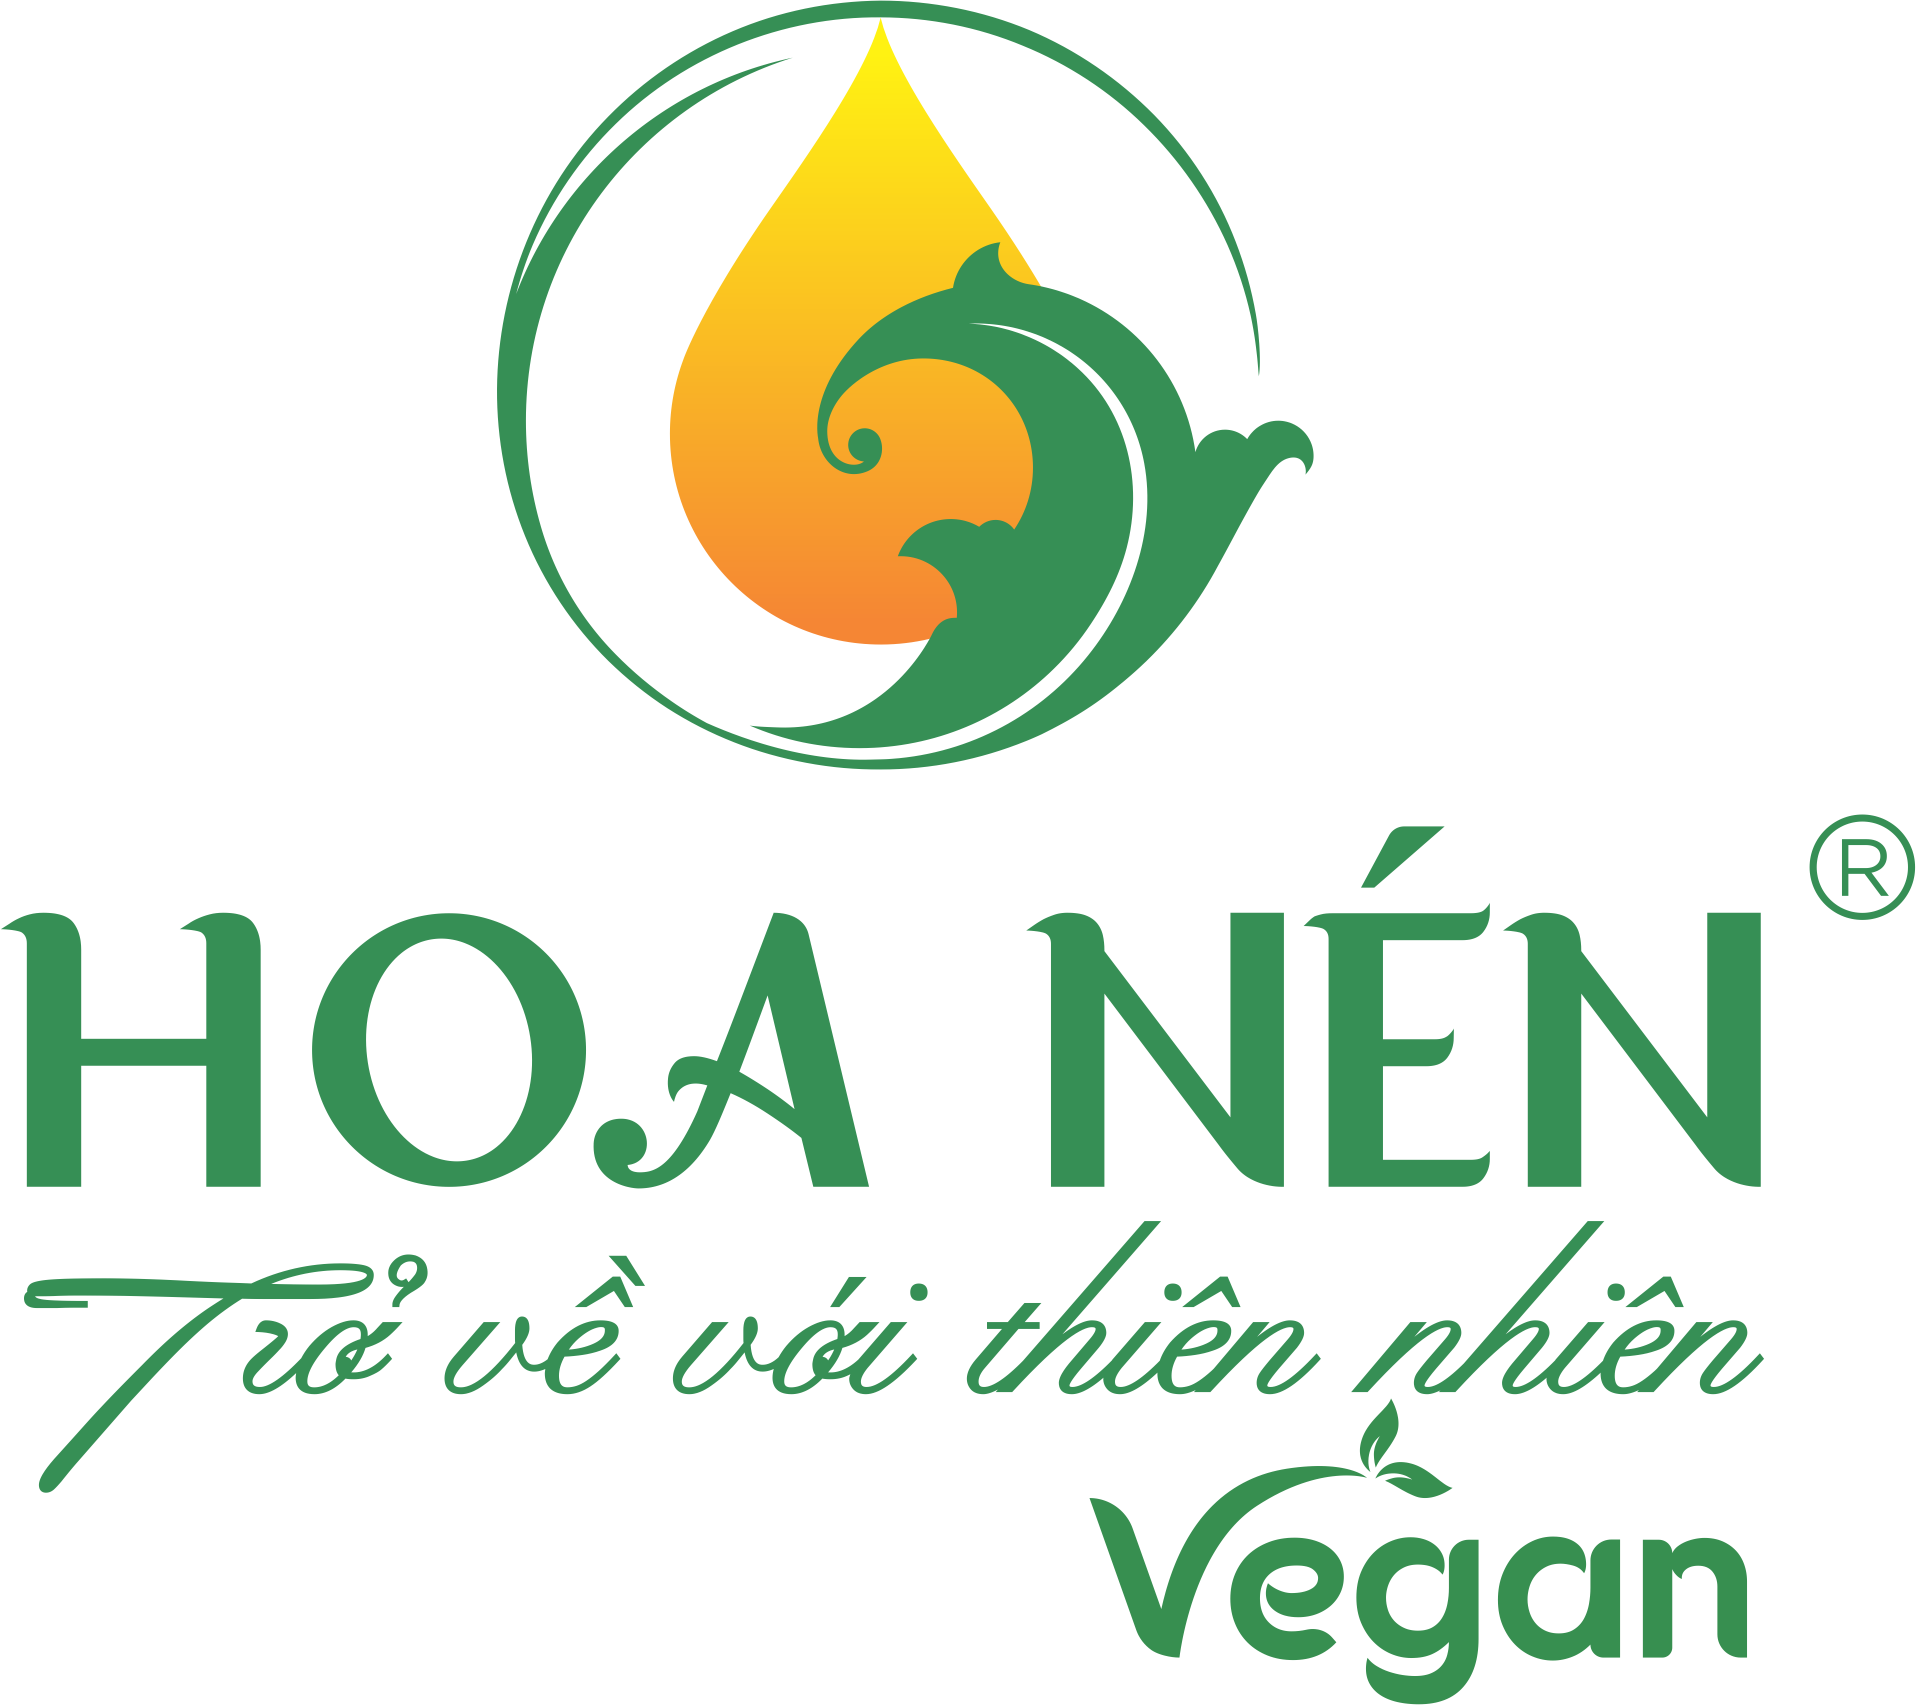 Tea tree oil, Hoa Nén, Essential oils, Vegan products, Thua Thien Hue, Cultural promotion, Local products, Organic farming, Health and wellness products